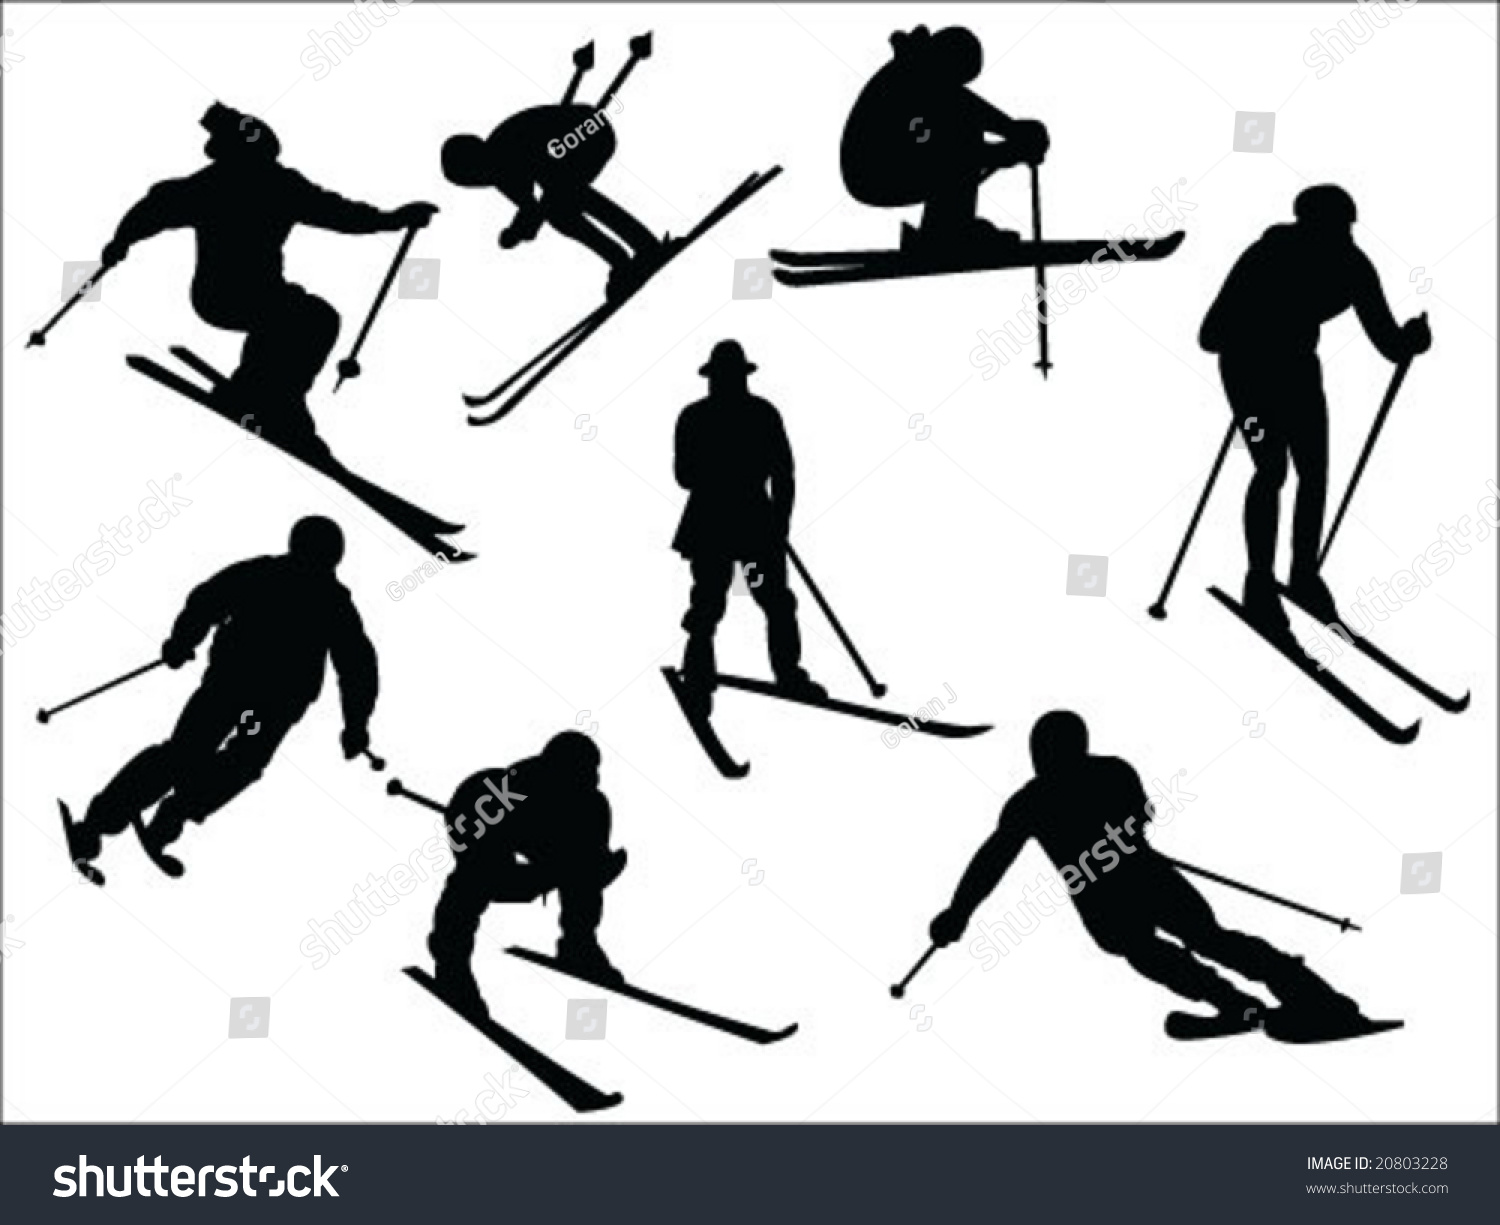 Skier Silhouette Collection Vector - 20803228 : Shutterstock